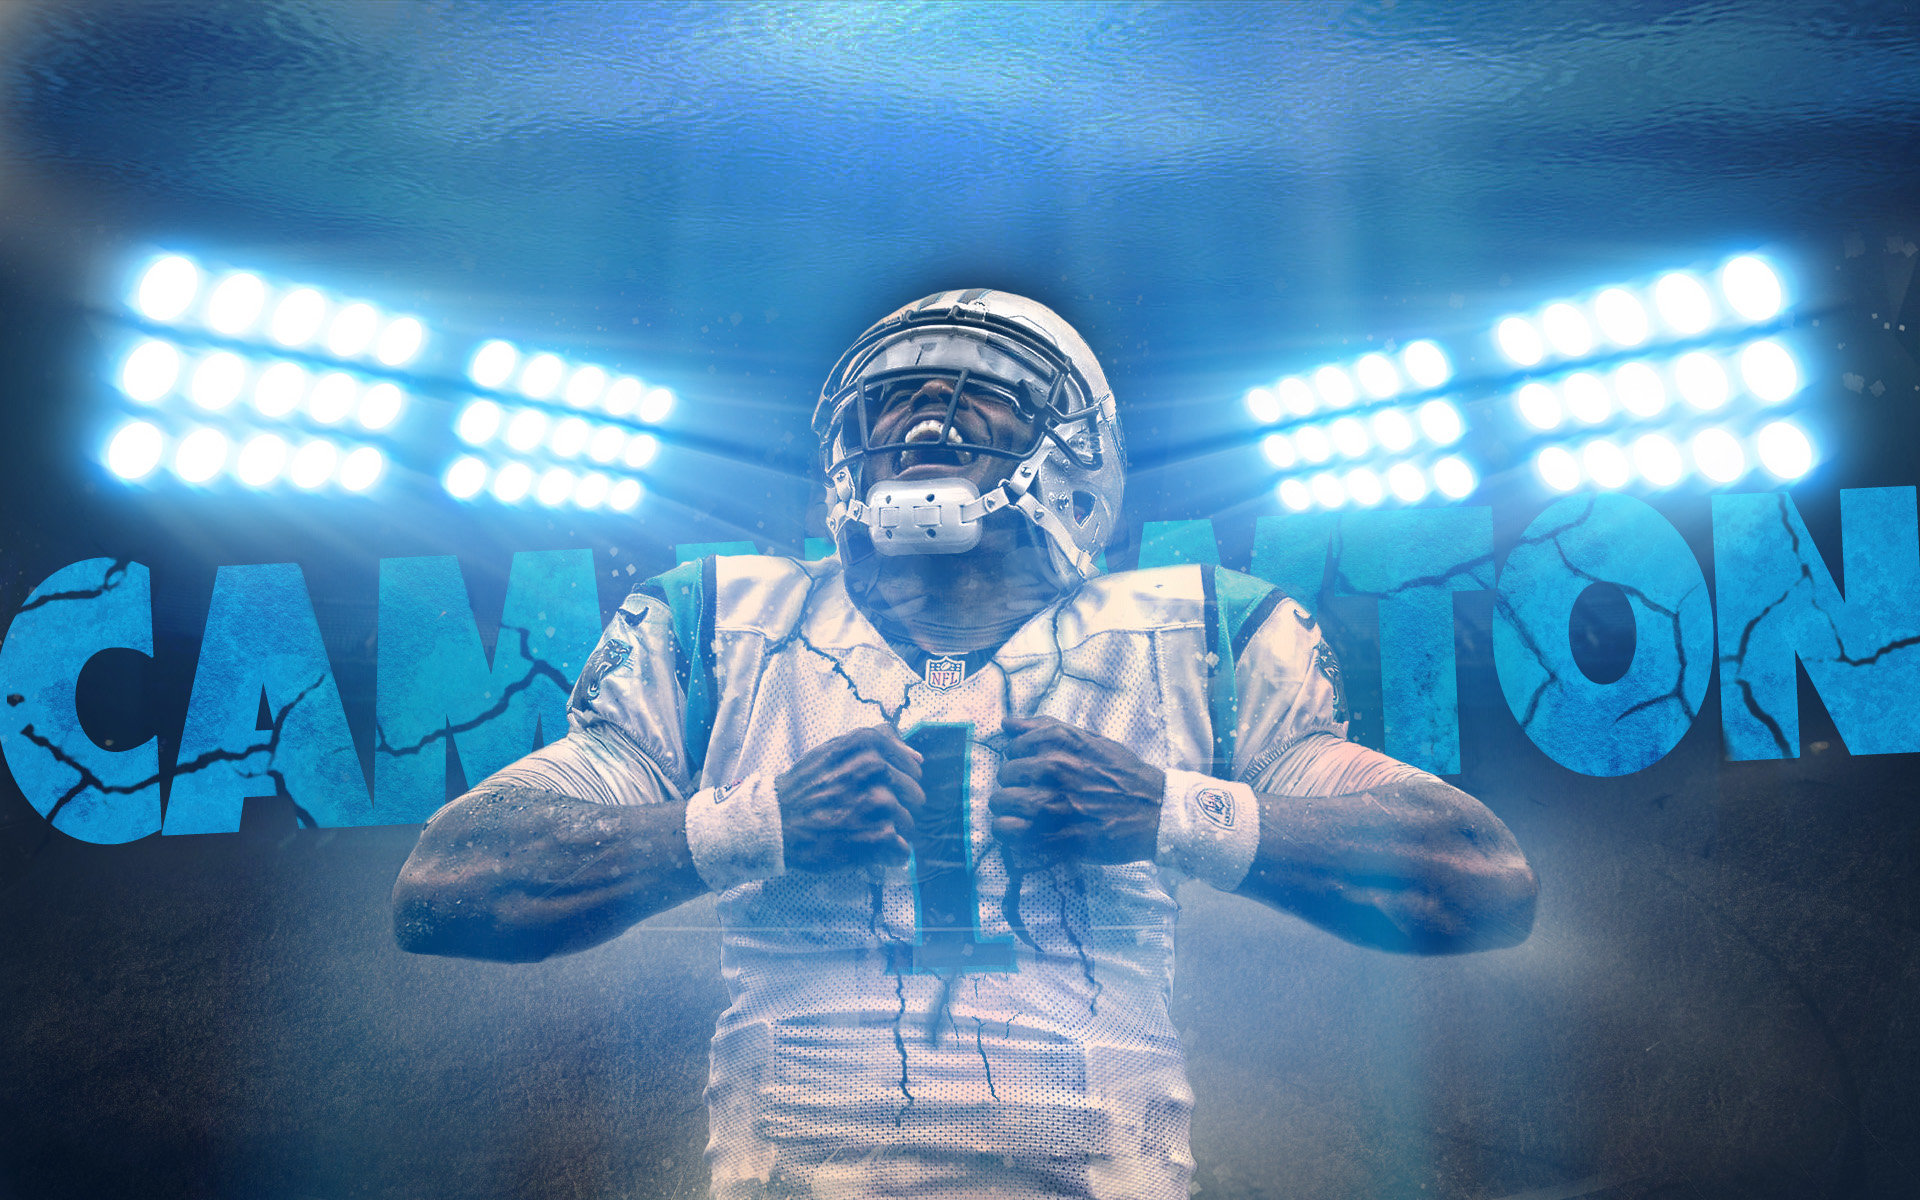 Download hd 1920x1200 Cam Newton desktop background ID:57594 for free